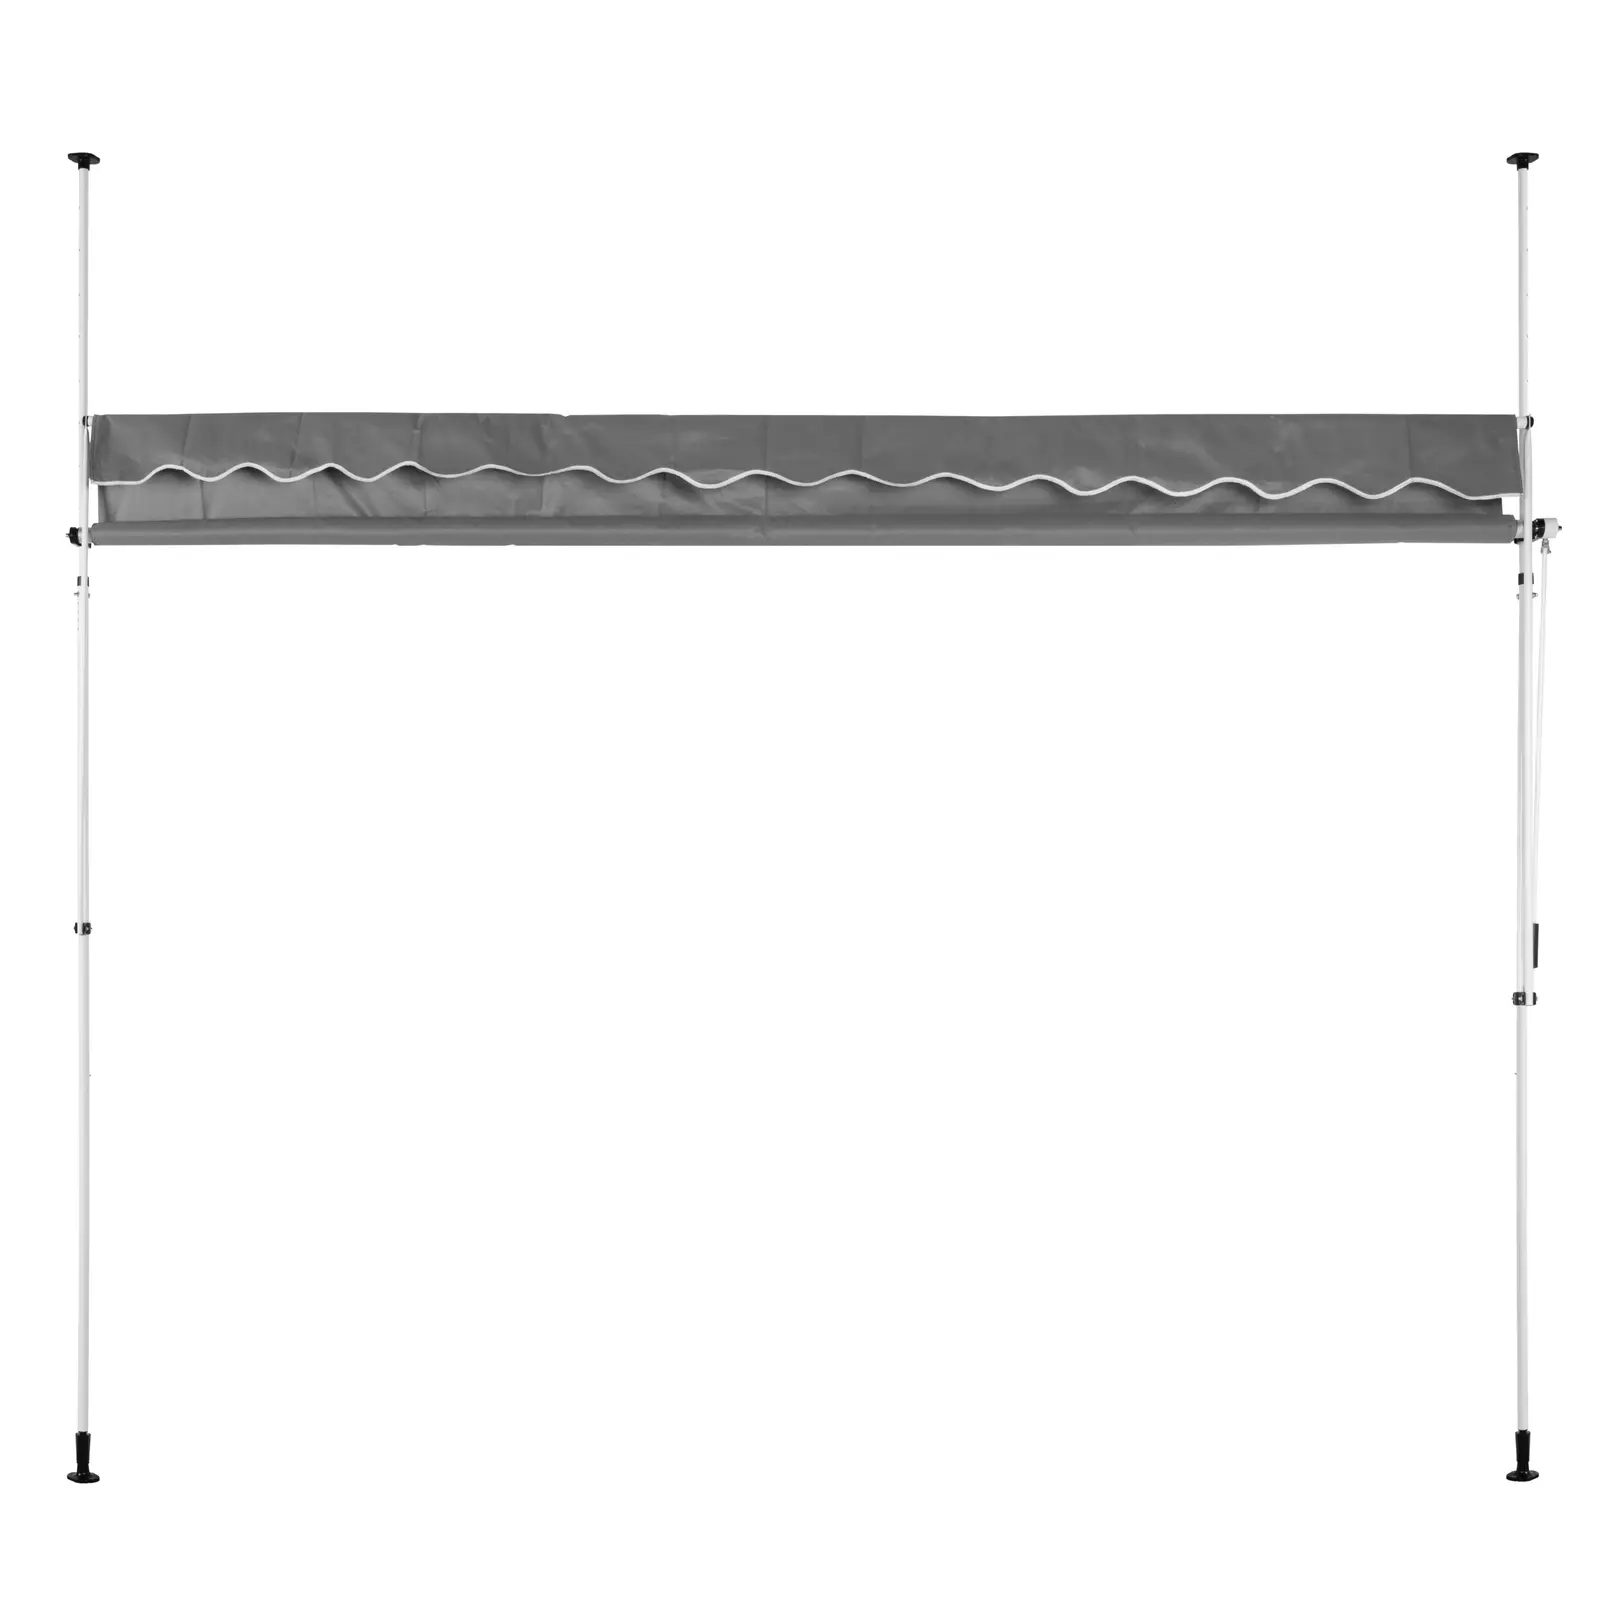 Manual Awning - 2 - 3.1 m - 350 x 120 cm - UV-resistant - anthracite grey / white